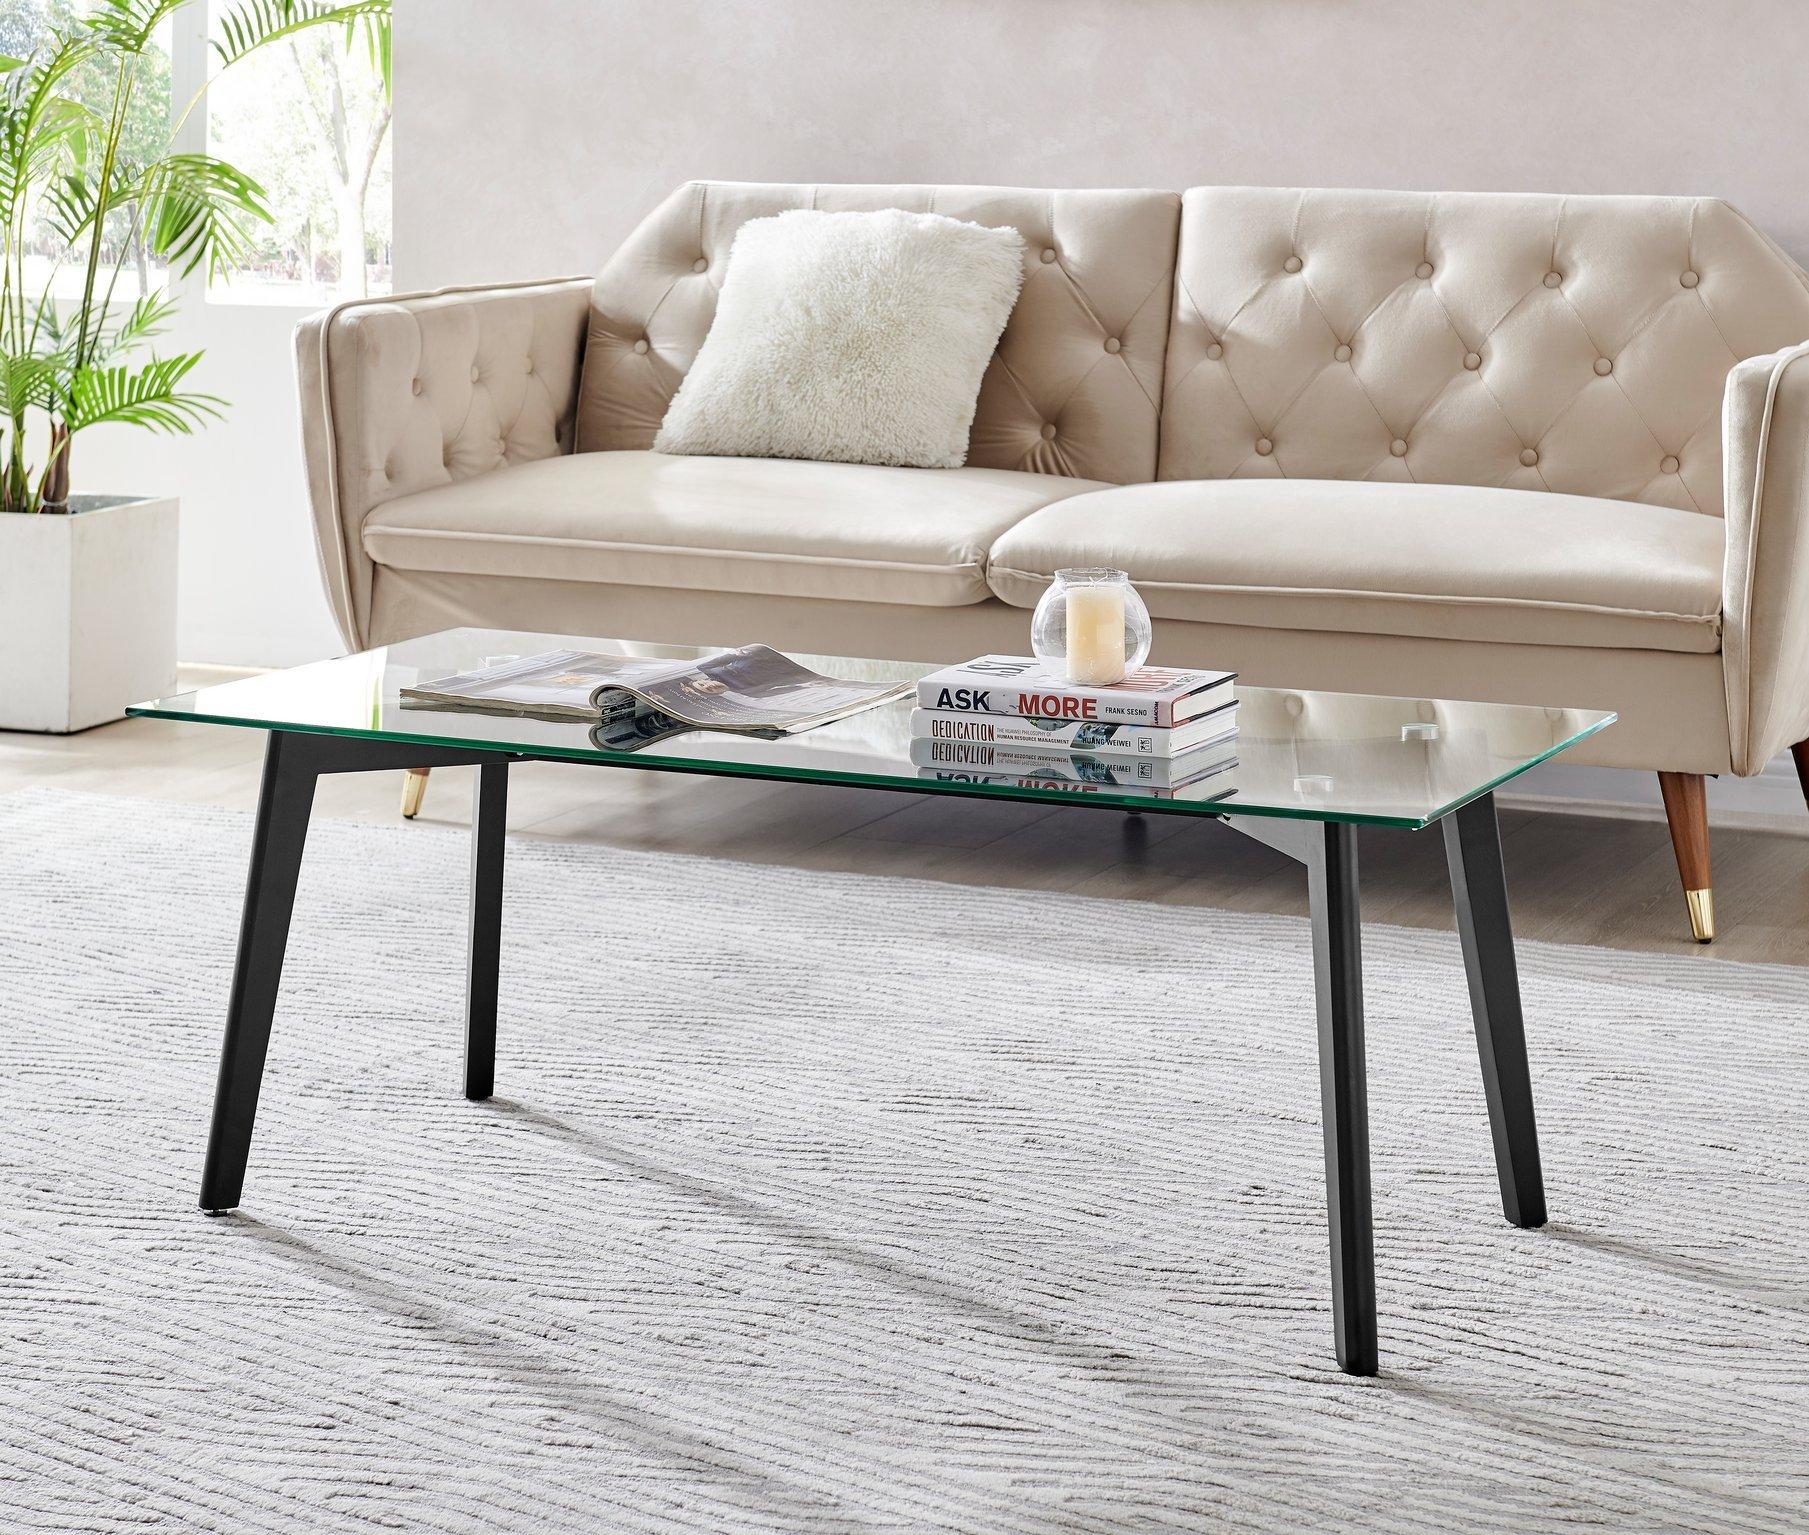 Malmo Beech Wood Scandi Inspired Coffee Table With Rectangular Tempered Glass Top and Wooden Legs